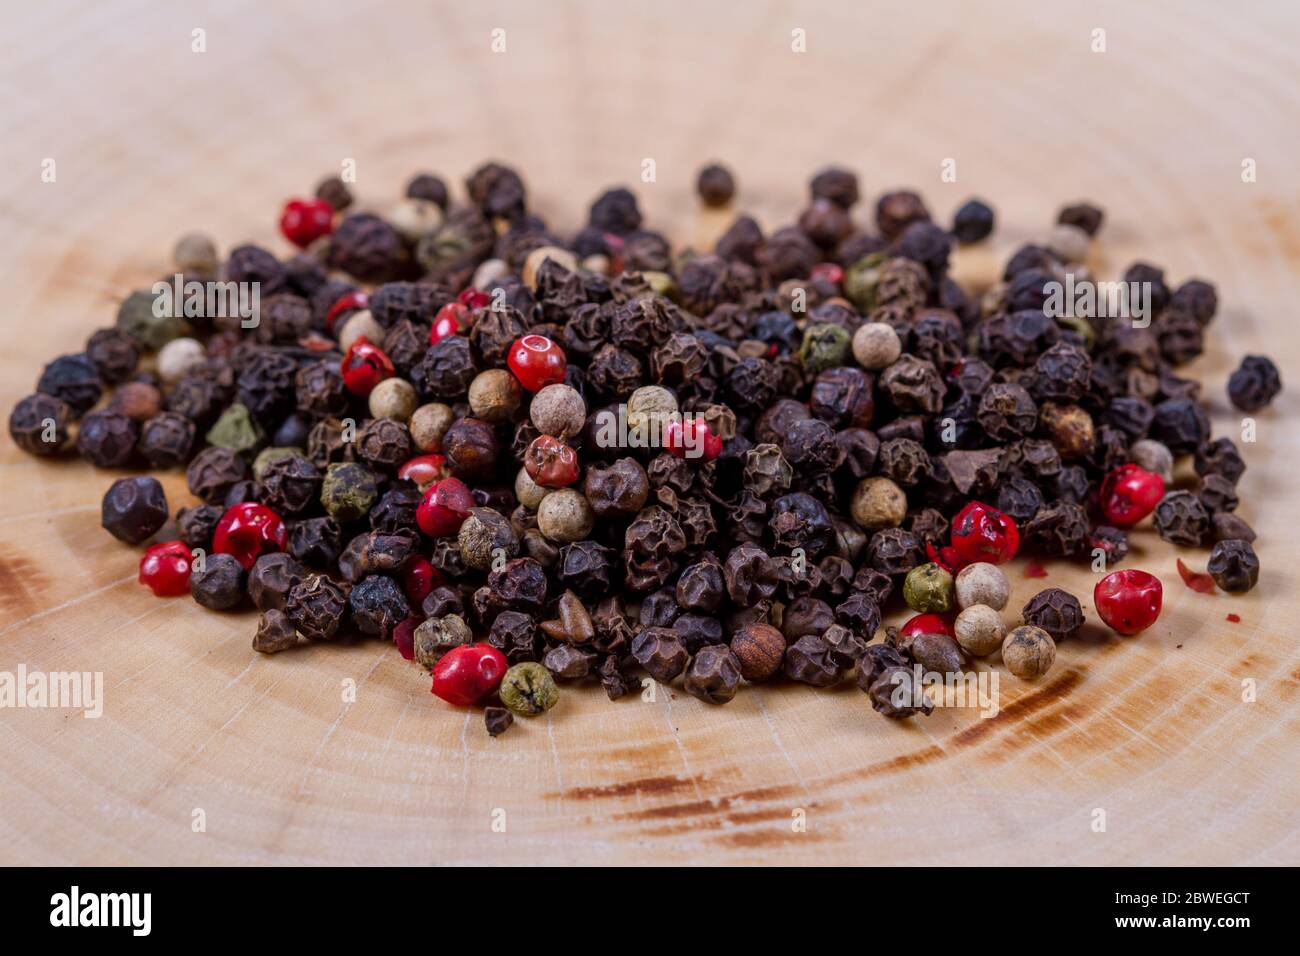 Pepper mix peas closeup on the table. Spice. Healthly food. Stock Photo